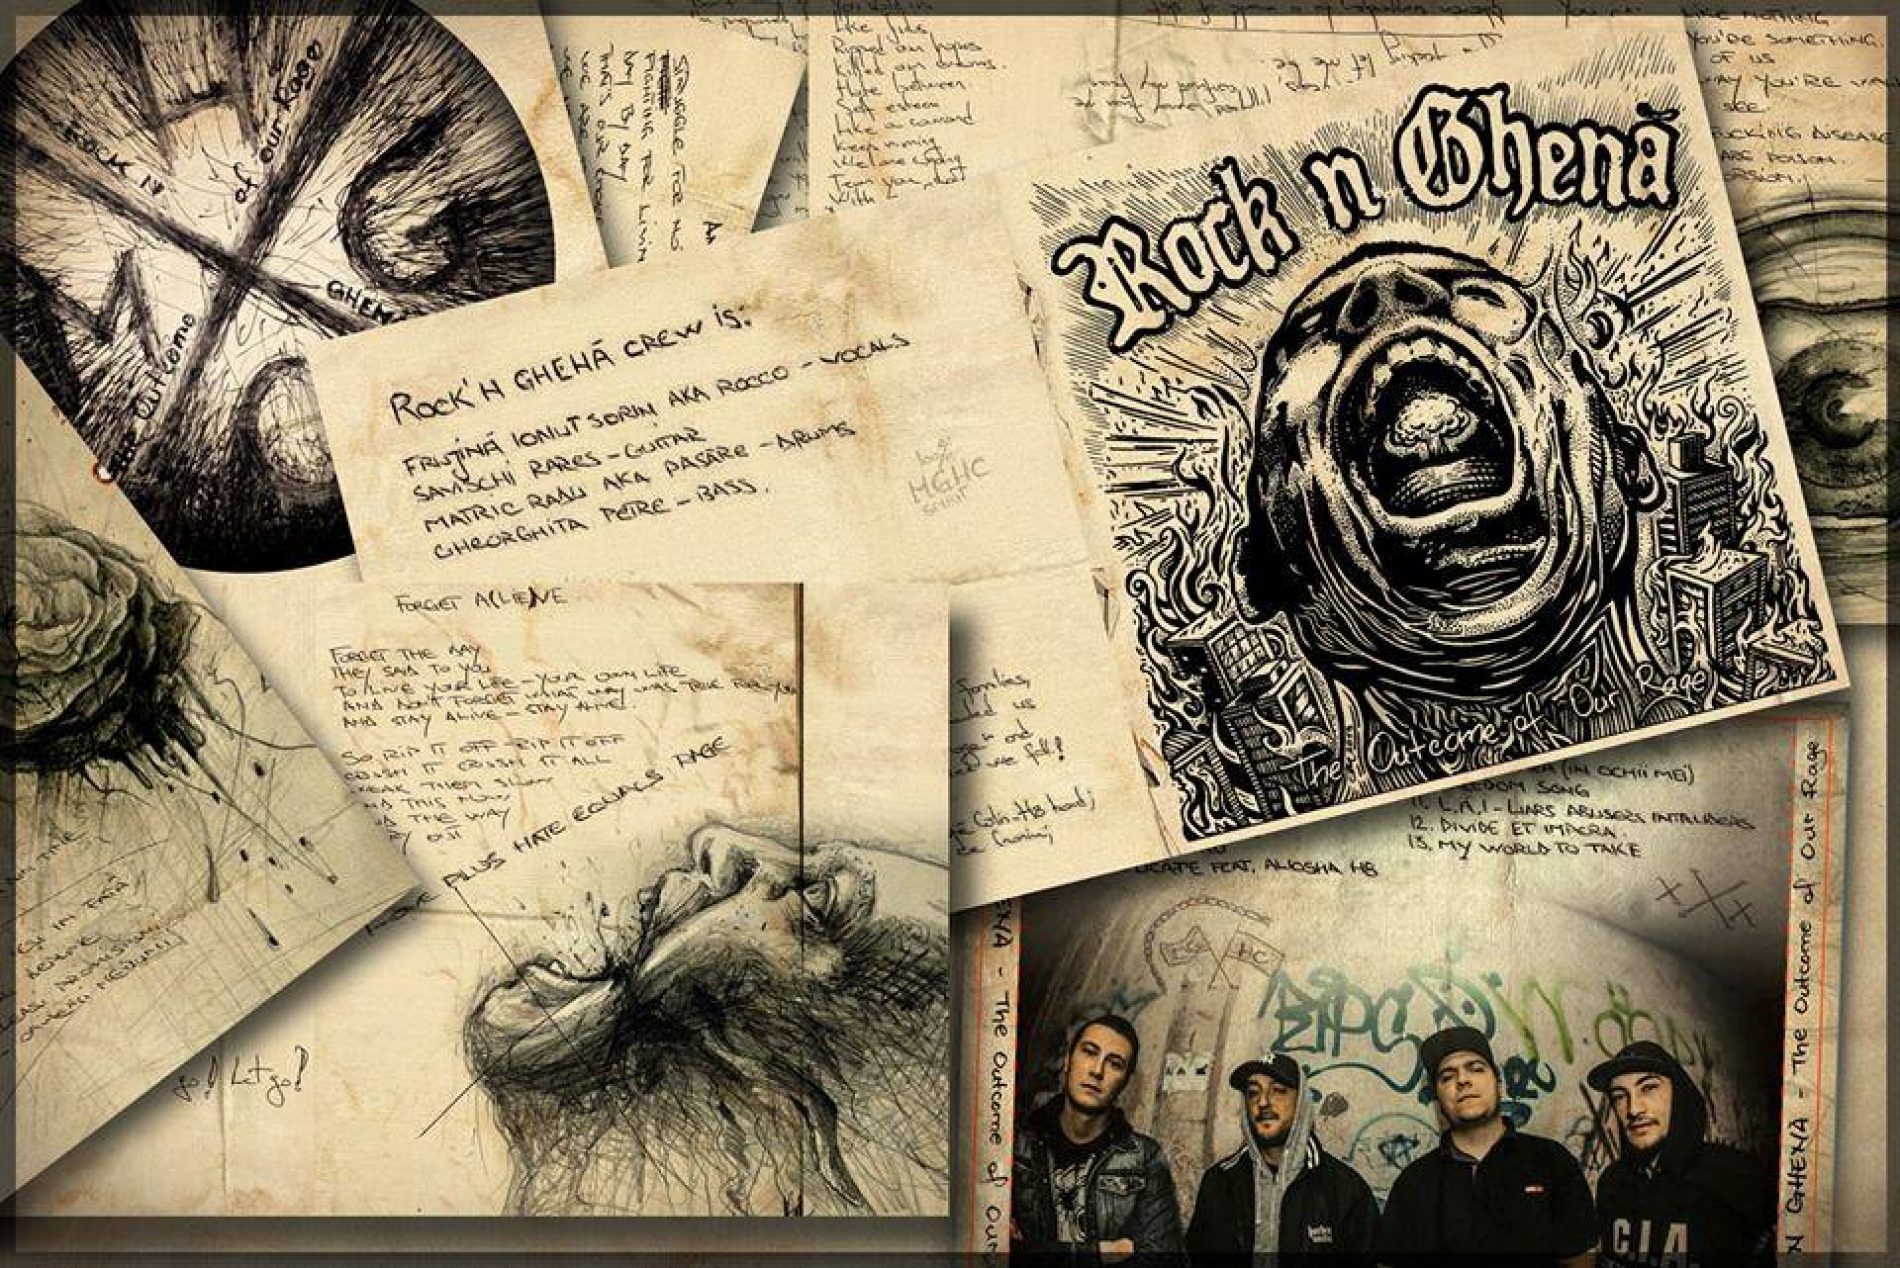 Rock n Ghena: The Outcome Of Our Rage (cronica album)